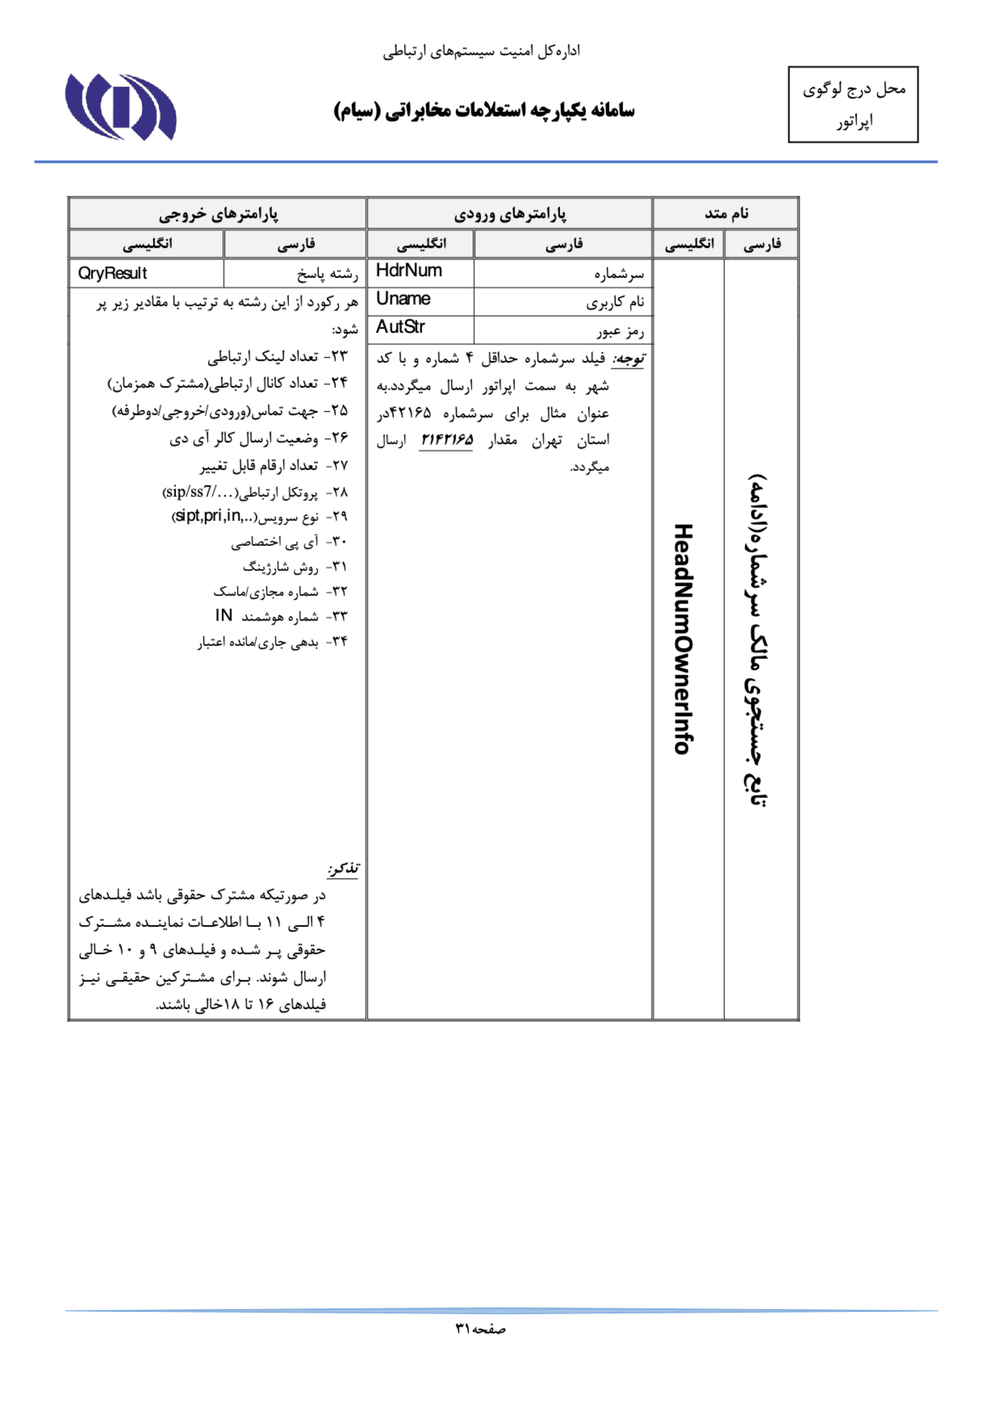 Page 31 from Iran’s SIAM Manual in Persian for Tracking and Controlling Mobile Phones